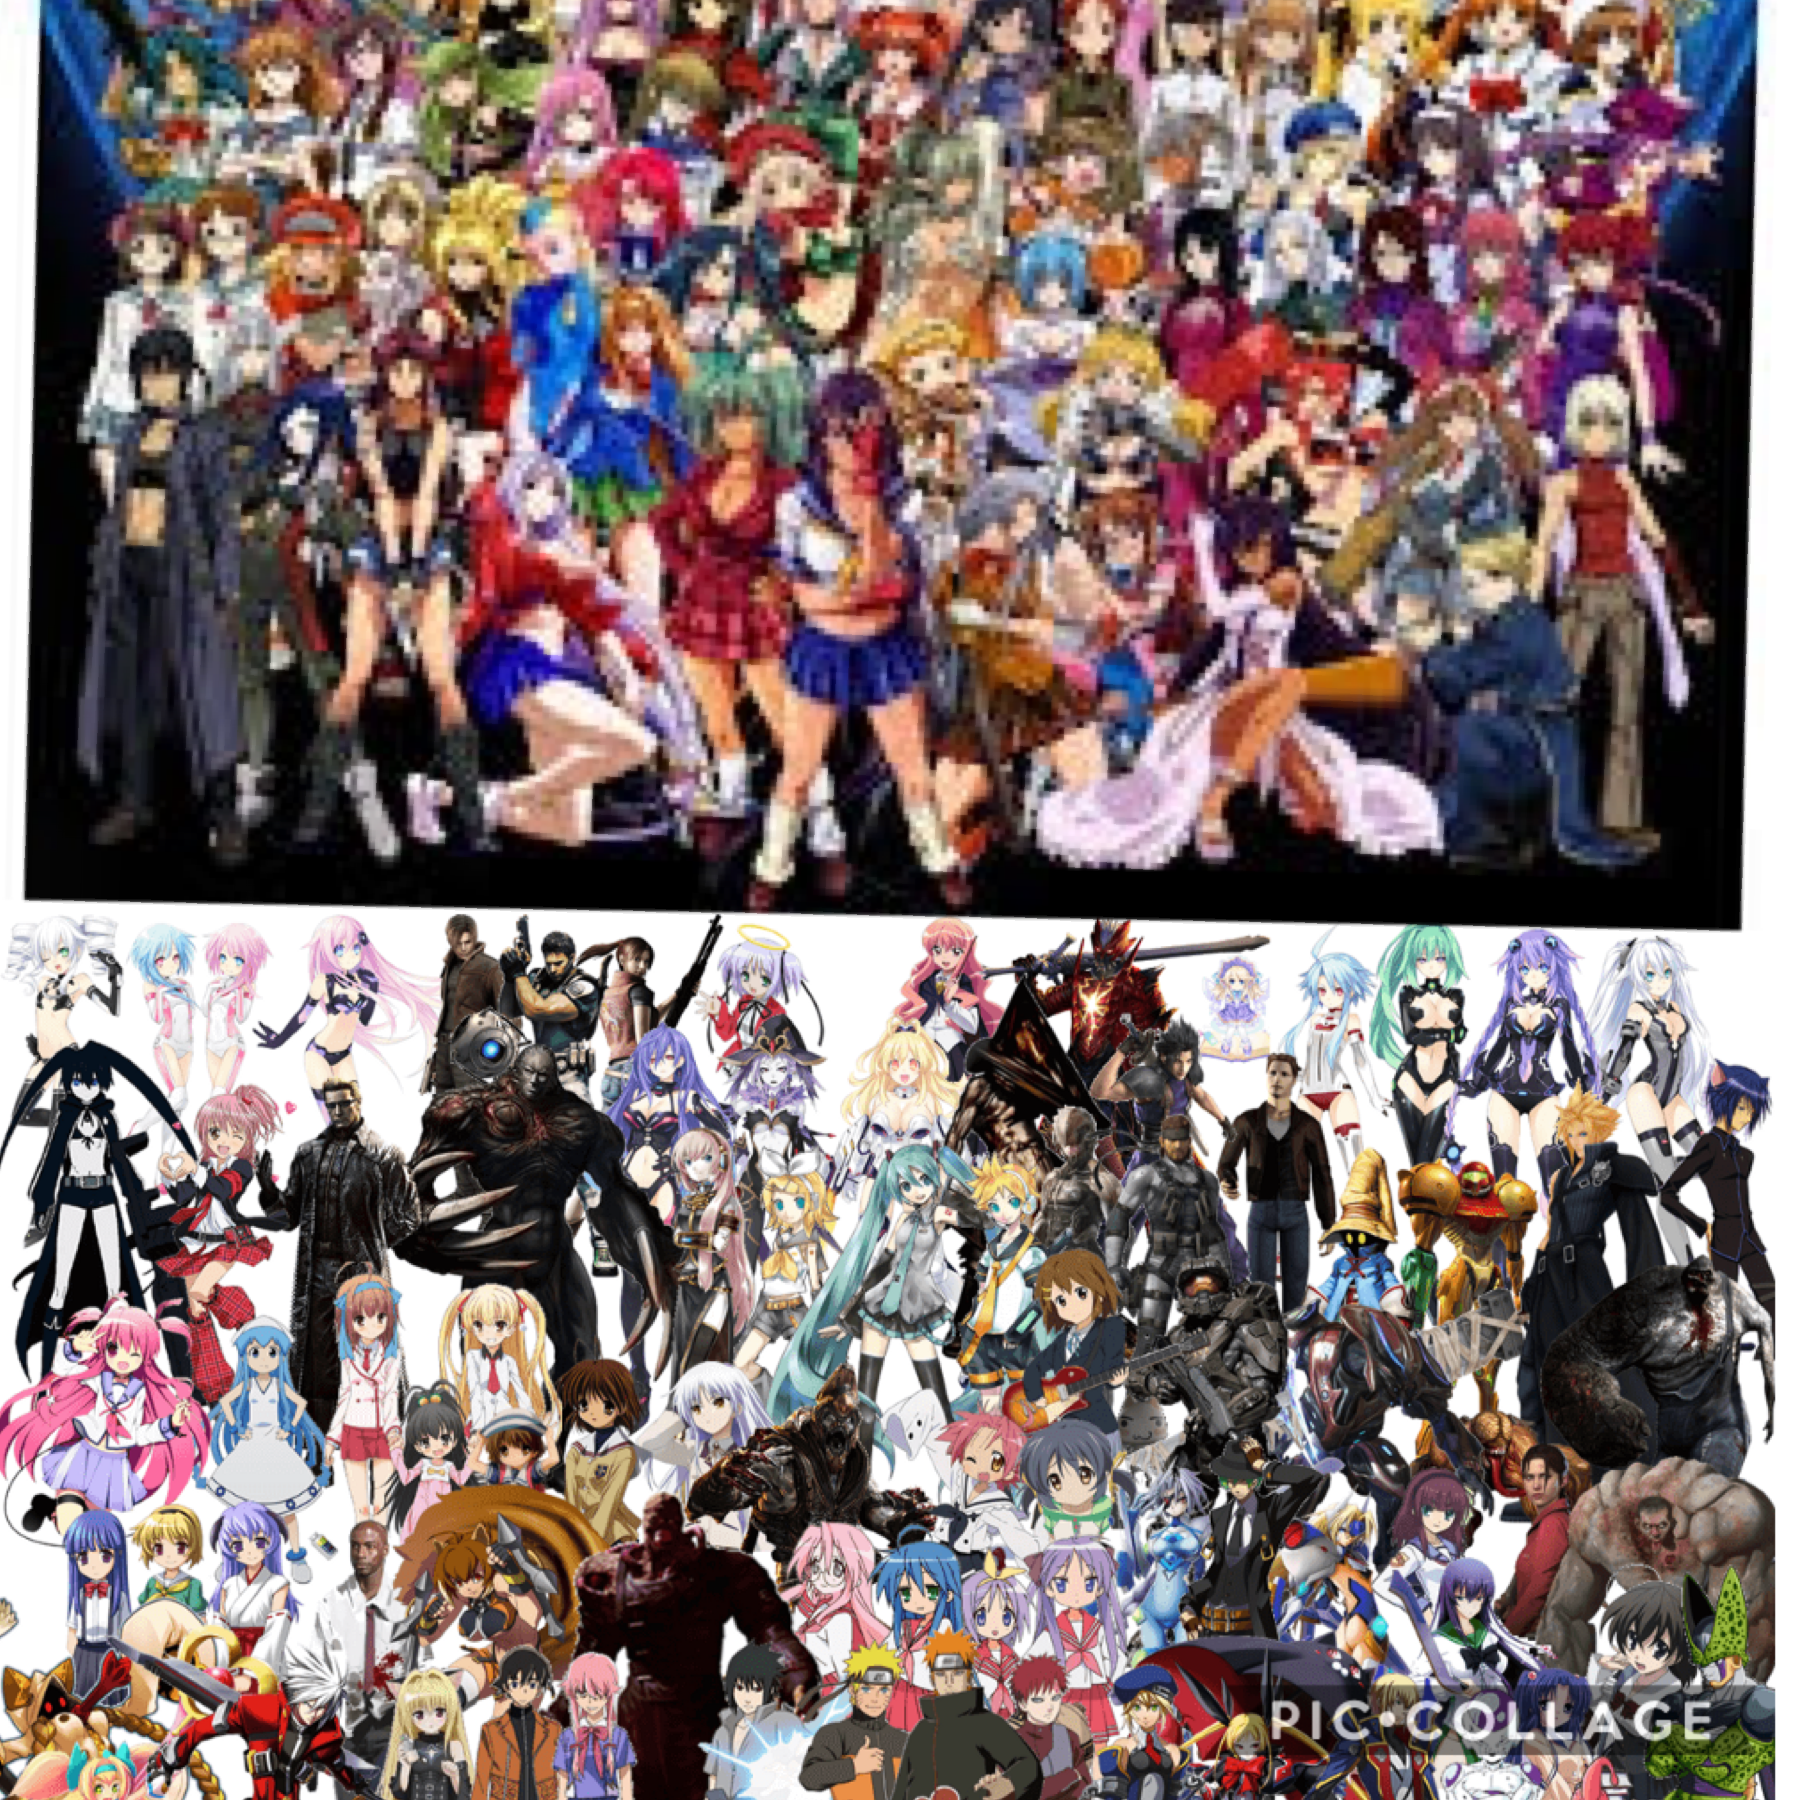 Like or comment if any of these are your favorite 